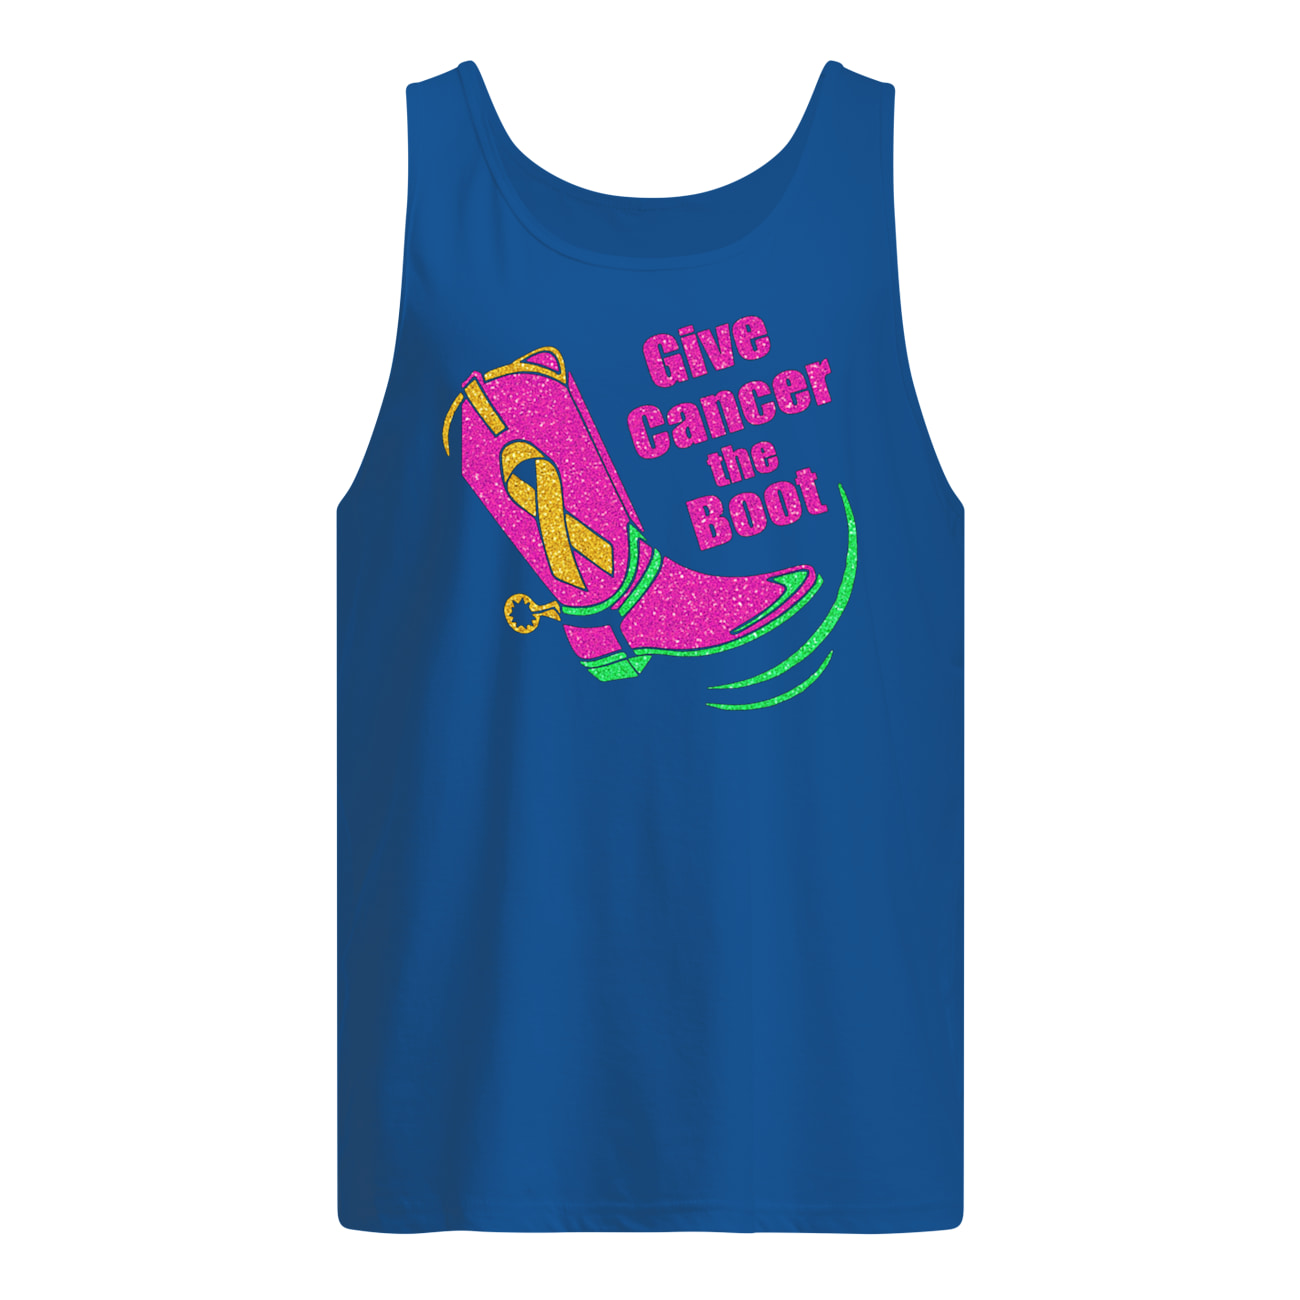 Give cancer the boot breast cancer awareness tank top